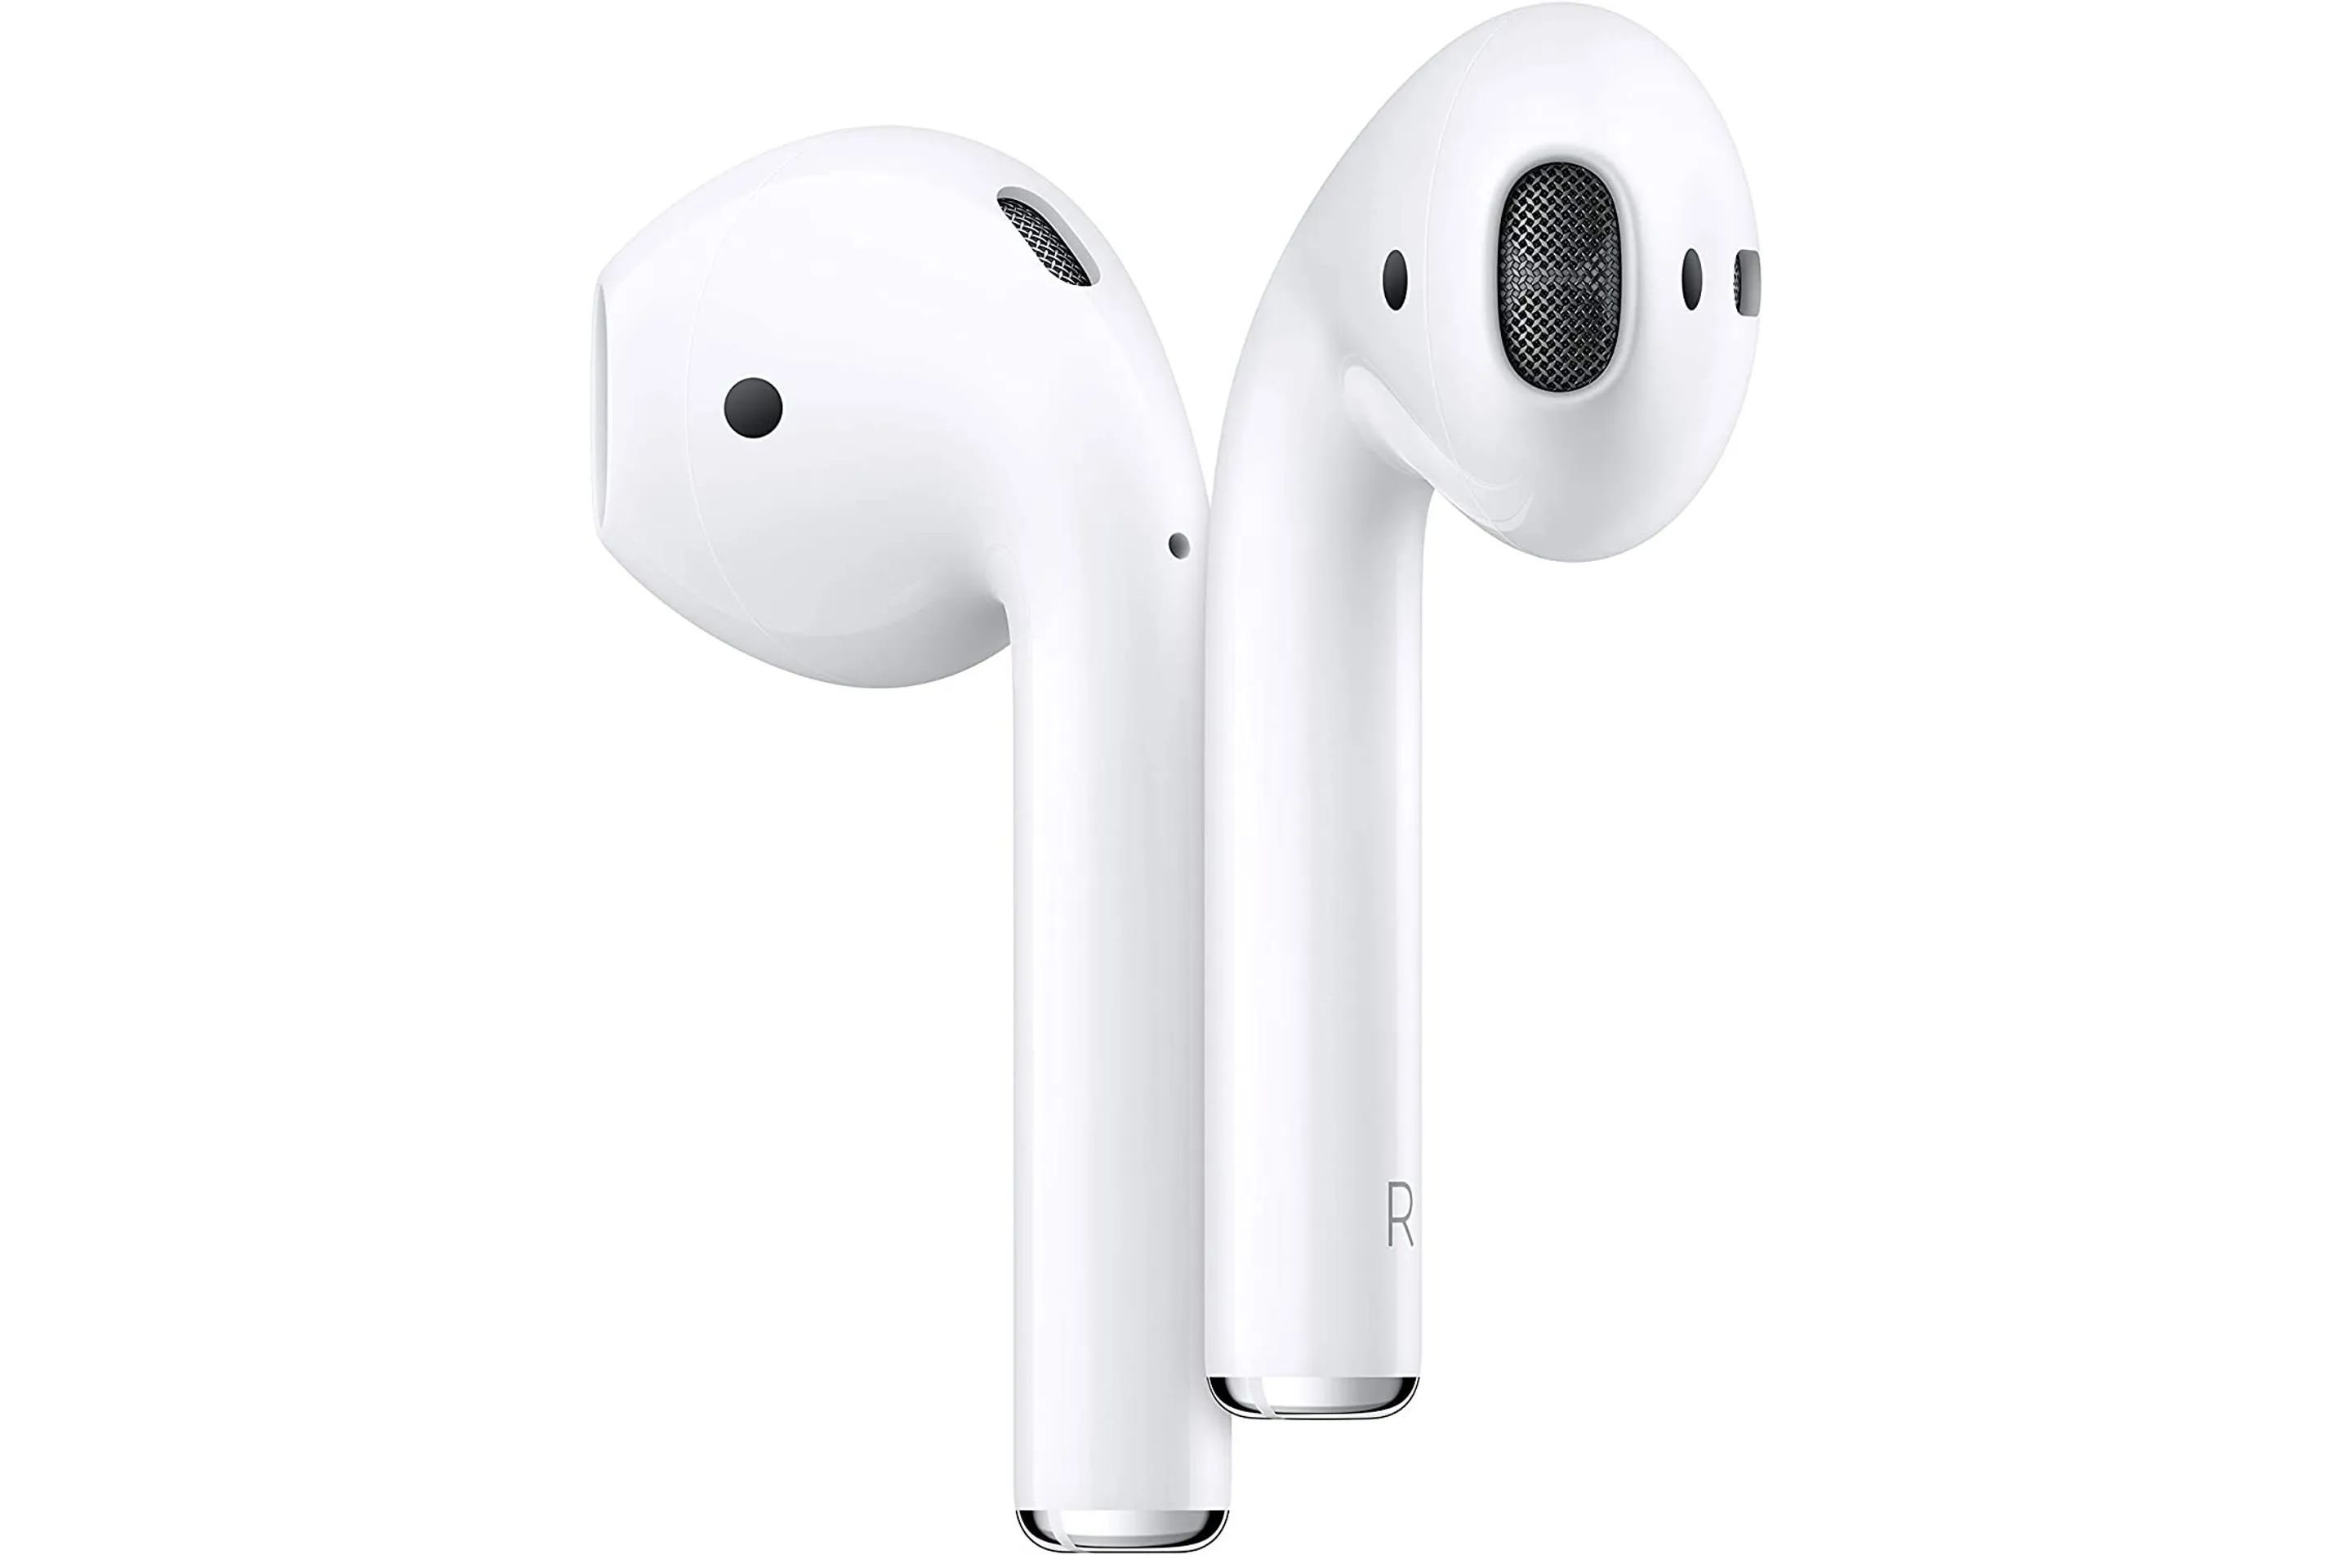 Selling fast!  Cyber Monday sale sees three cheapest-ever Apple  AirPods deals